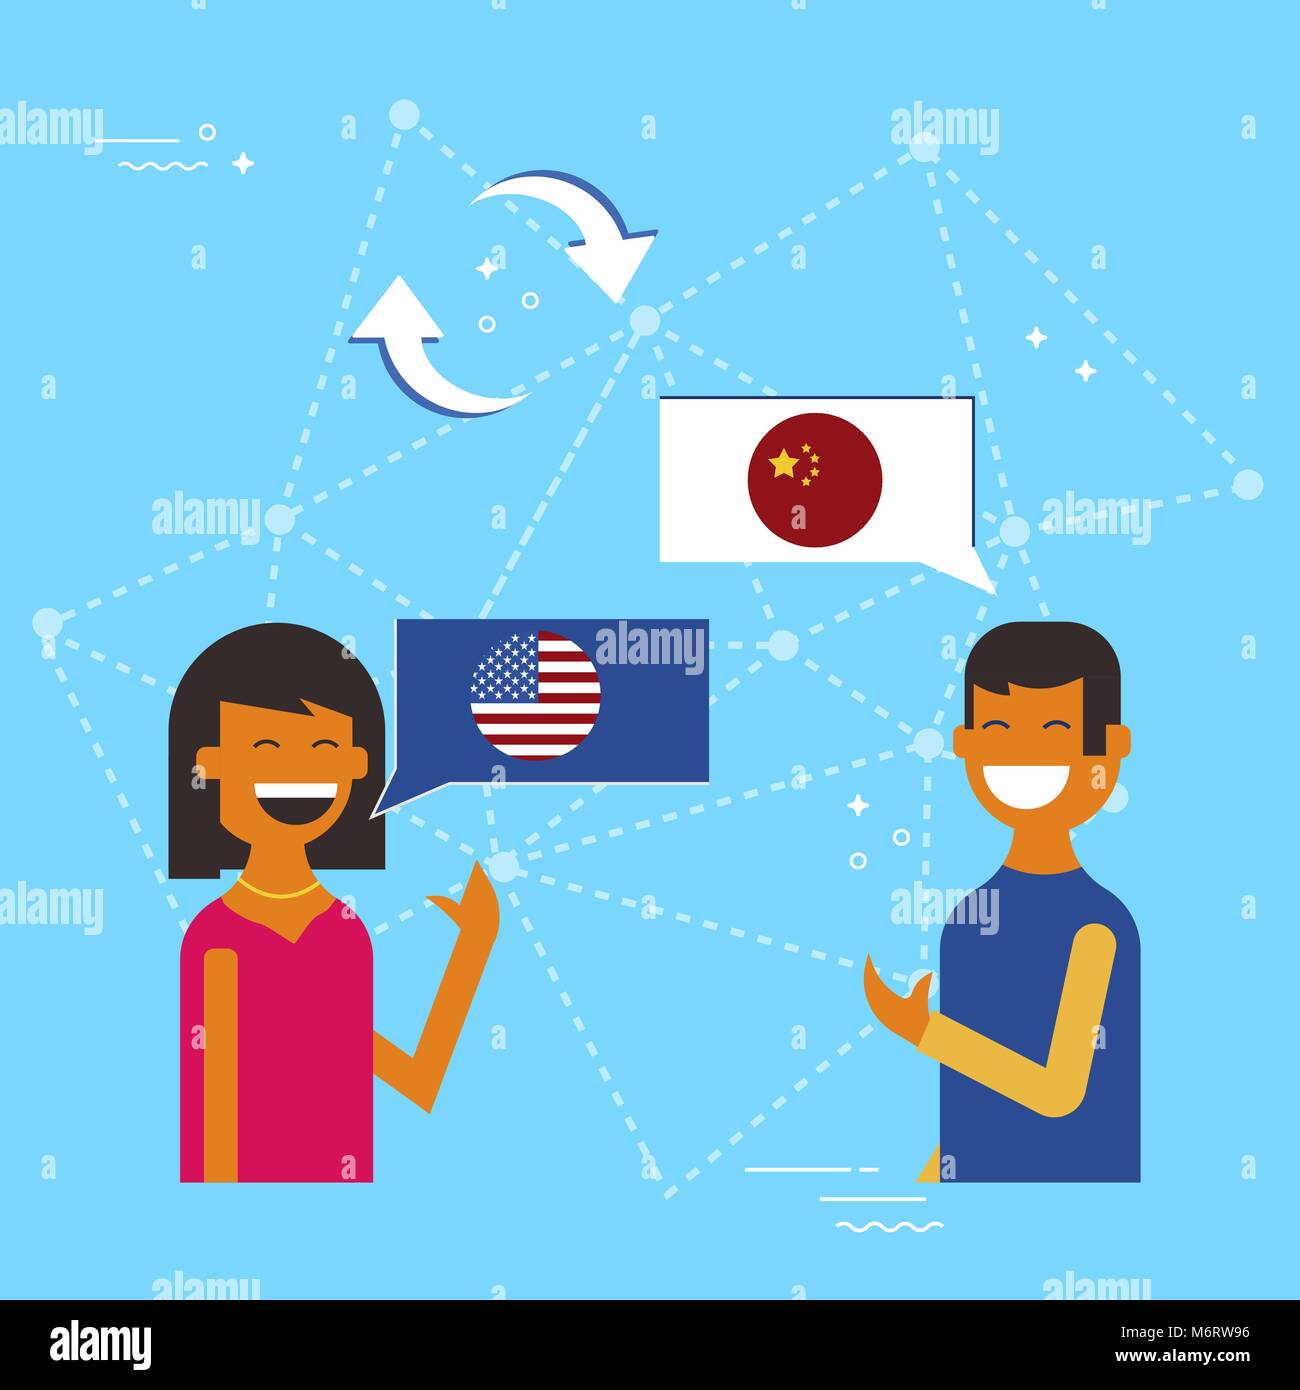 Friends from China and USA translating online conversation. International communications translation concept illustration. EPS10 vector. Stock Vector